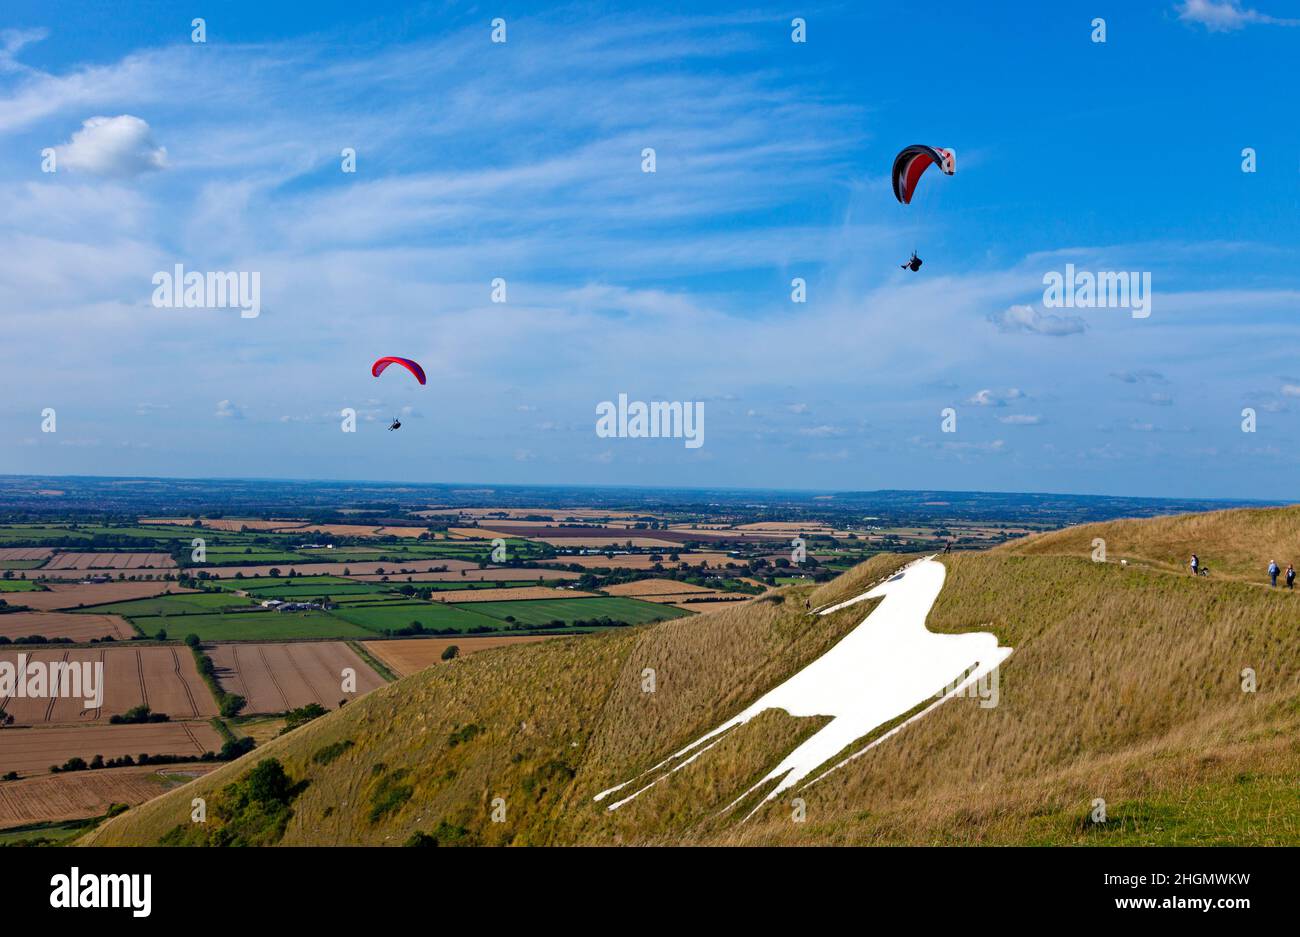 Hang gliders at Westbury White Horse chalk figure Wiltshire summer's day blue sky some white clouds copy space white horse in image Stock Photo